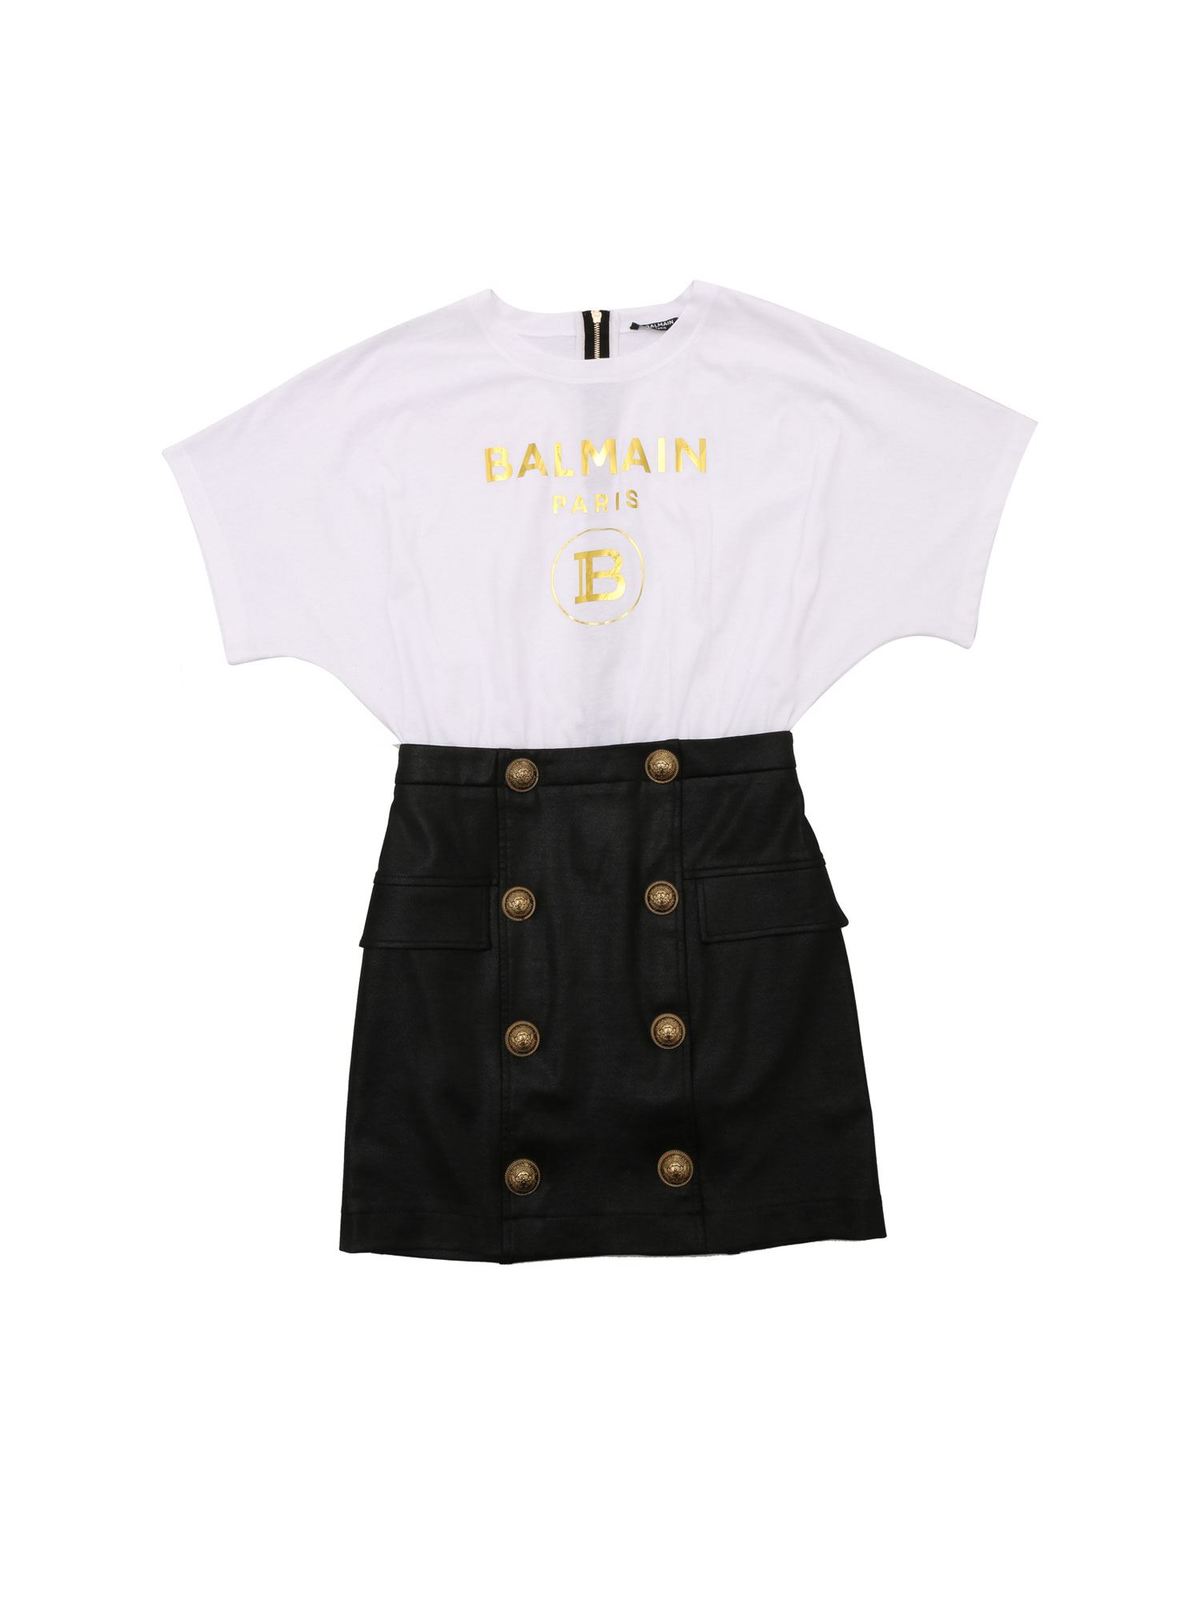 BALMAIN BUTTONS DRESS IN BLACK AND WHITE